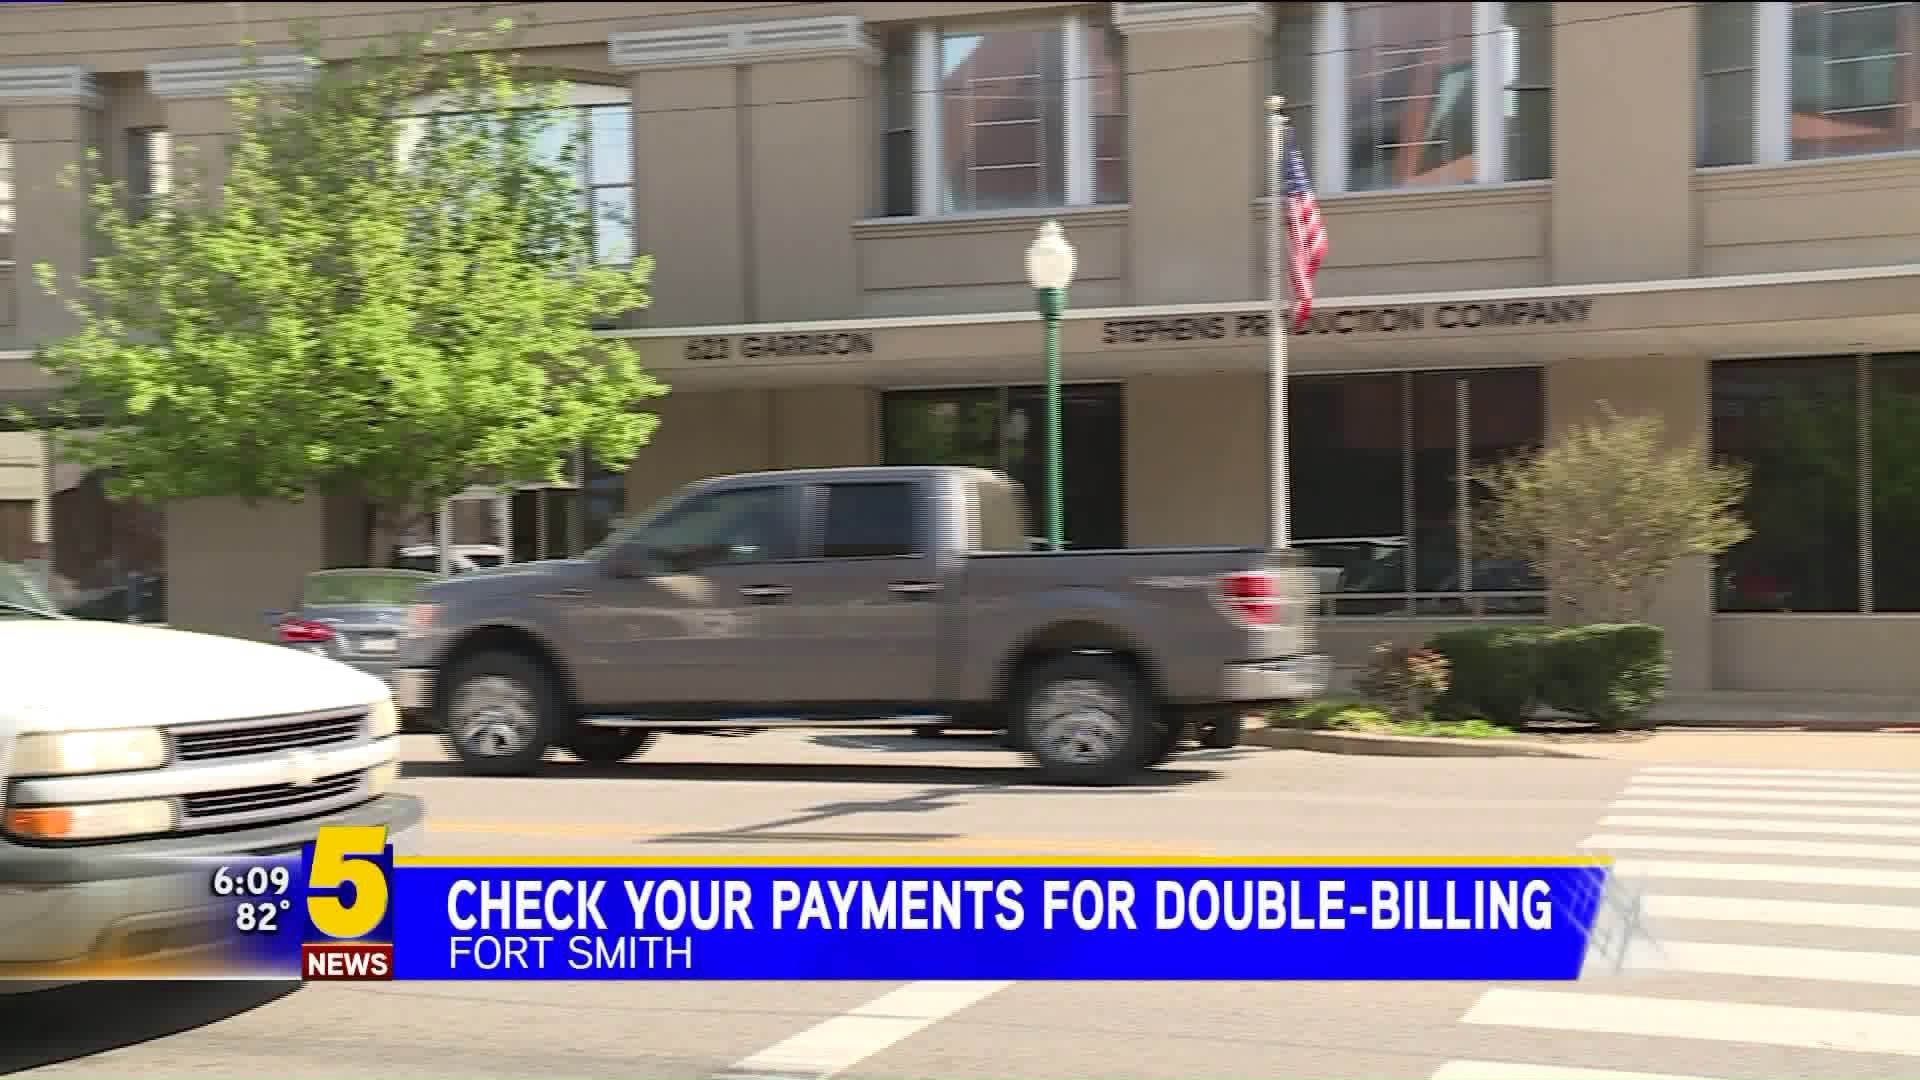 Fort Smith Utility Double Billing Issue